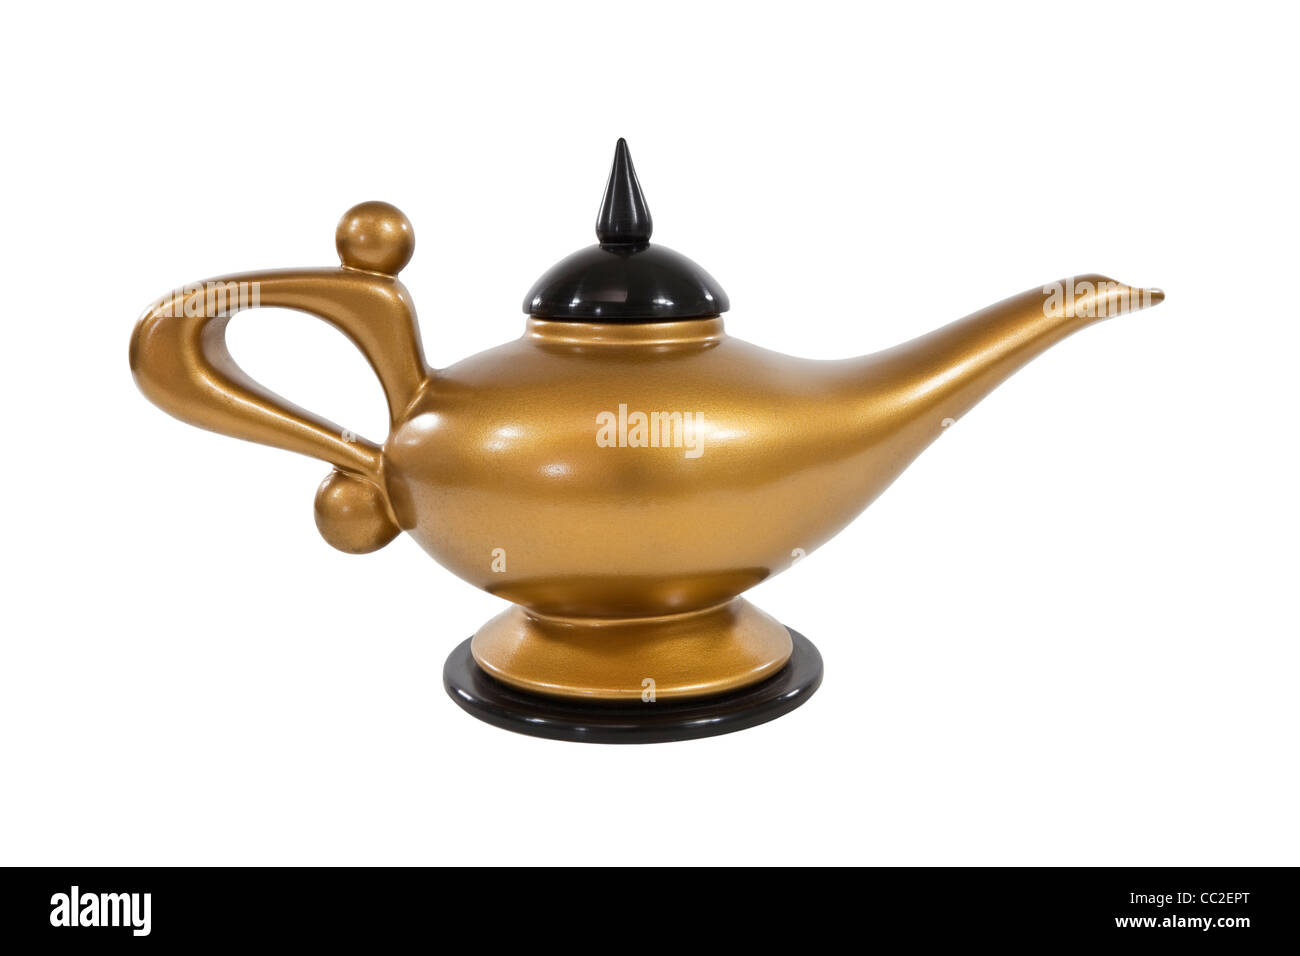 Golden magical genie lamp suitable for Aladini. Stock Photo